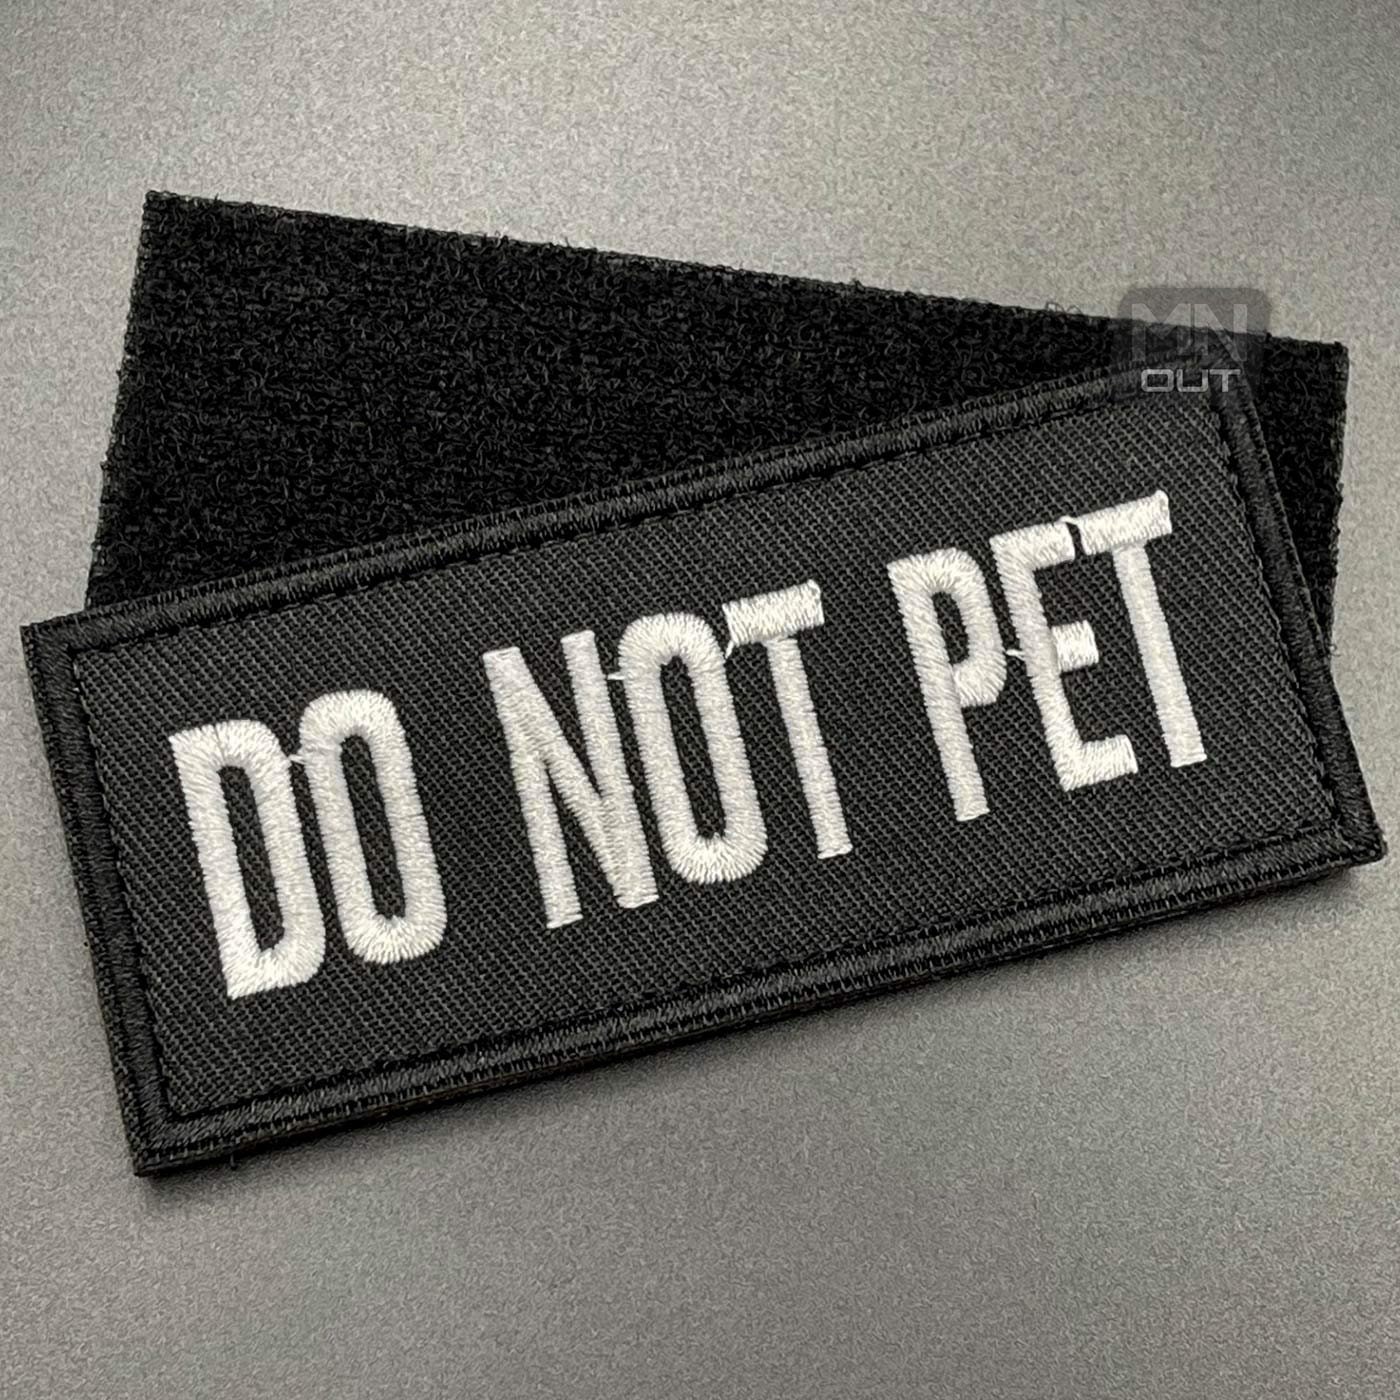 1 PC EMOTIONAL SUPPORT DO NOT PET BADGE Patches for ASK TO PET Harness Vest  Pet Service Dog In Training Hool and Loop PATCH